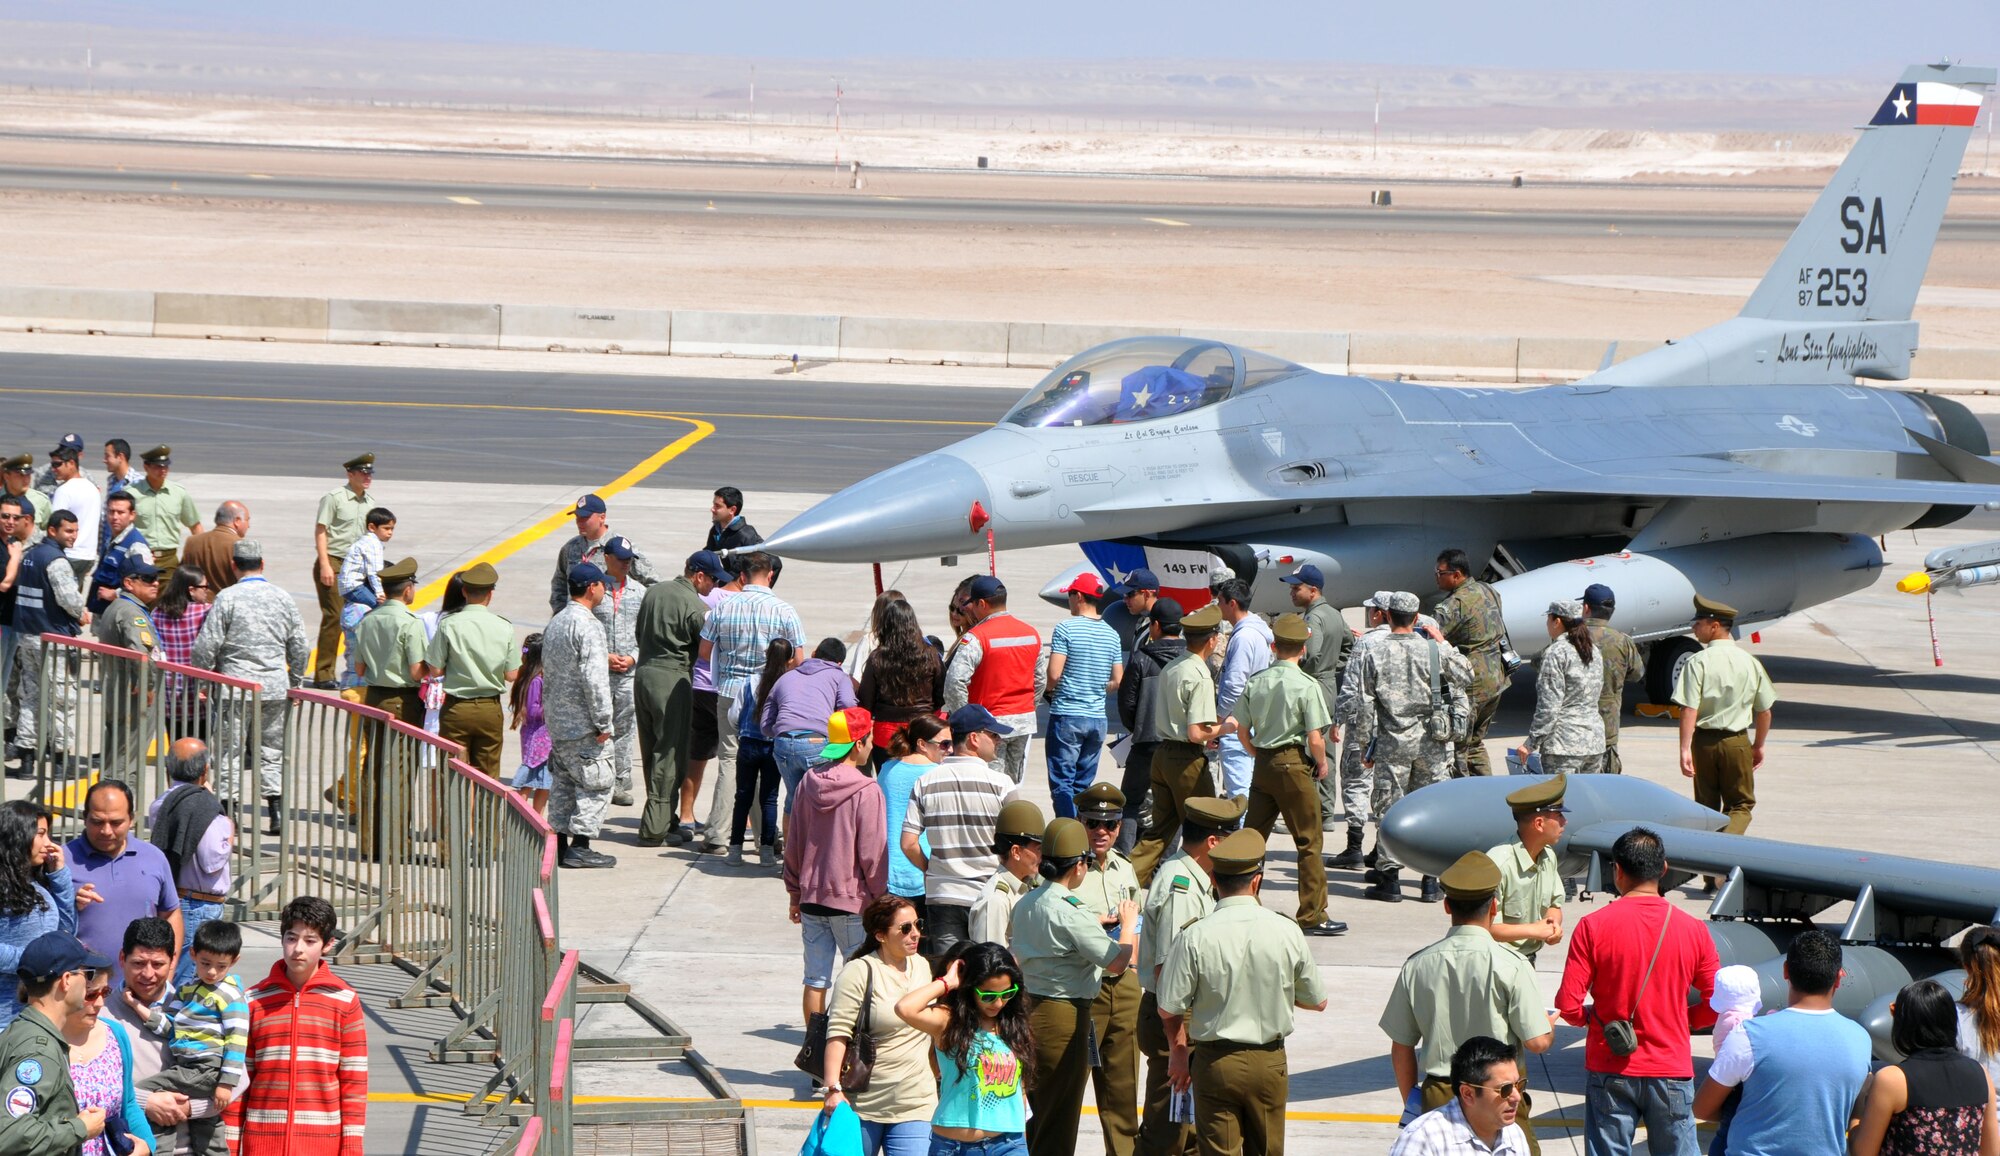 Onlookers from various agencies and branches of the Chilean government, along with their families, visit with Airmen from the Texas Air National Guard's 149th Fighter Wing during an Open Day at Exercise Salitre 2014 at Cerro Moreno Air Base, Chile. The exercise also includes the air forces of Brazil, Argentina and Uruguay and focuses on strengthening partnerships and interoperability in a coalition format. (U.S. Air Force photo by Capt. Bryan Bouchard/Released)